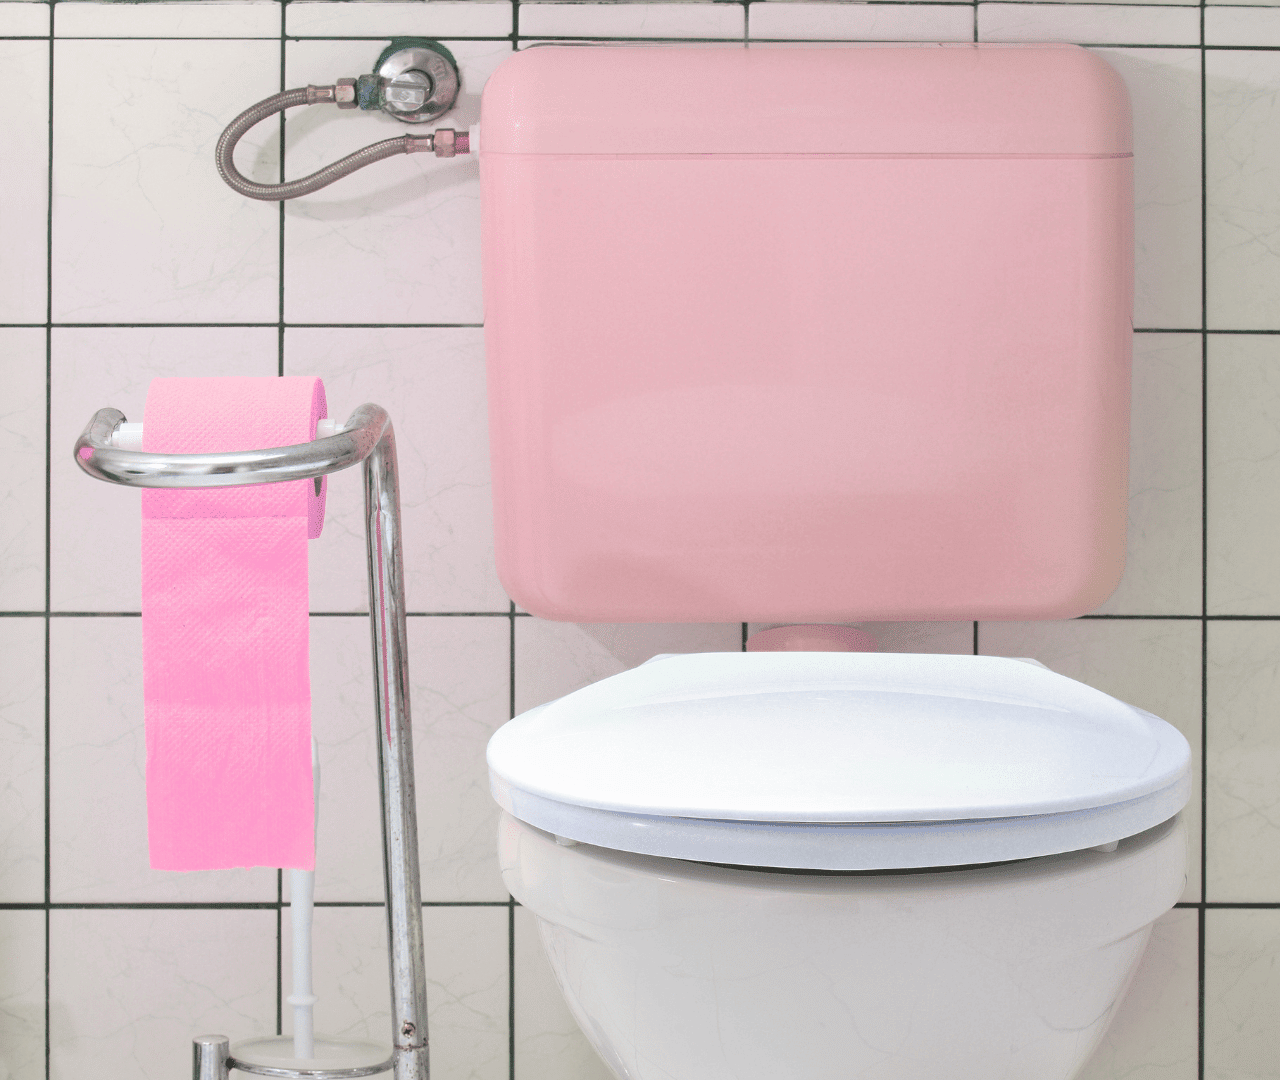 How Can I Use Leftover Waste Water to Flush My Toilet?